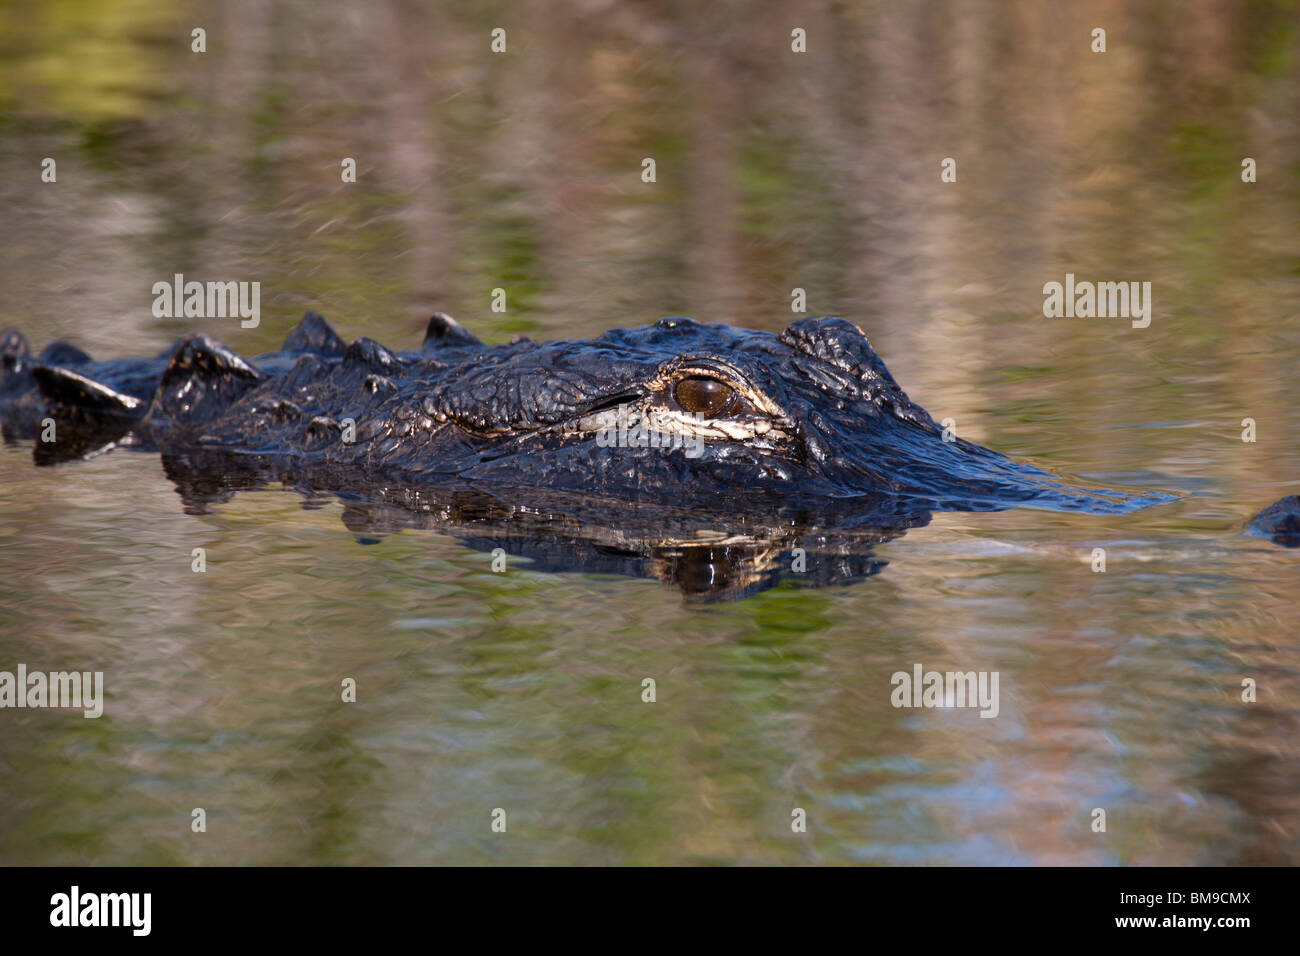 Close-up of eye and reflection of endangered Alligator swimming in calm waters of Everglades National Park Florida USA Stock Photo